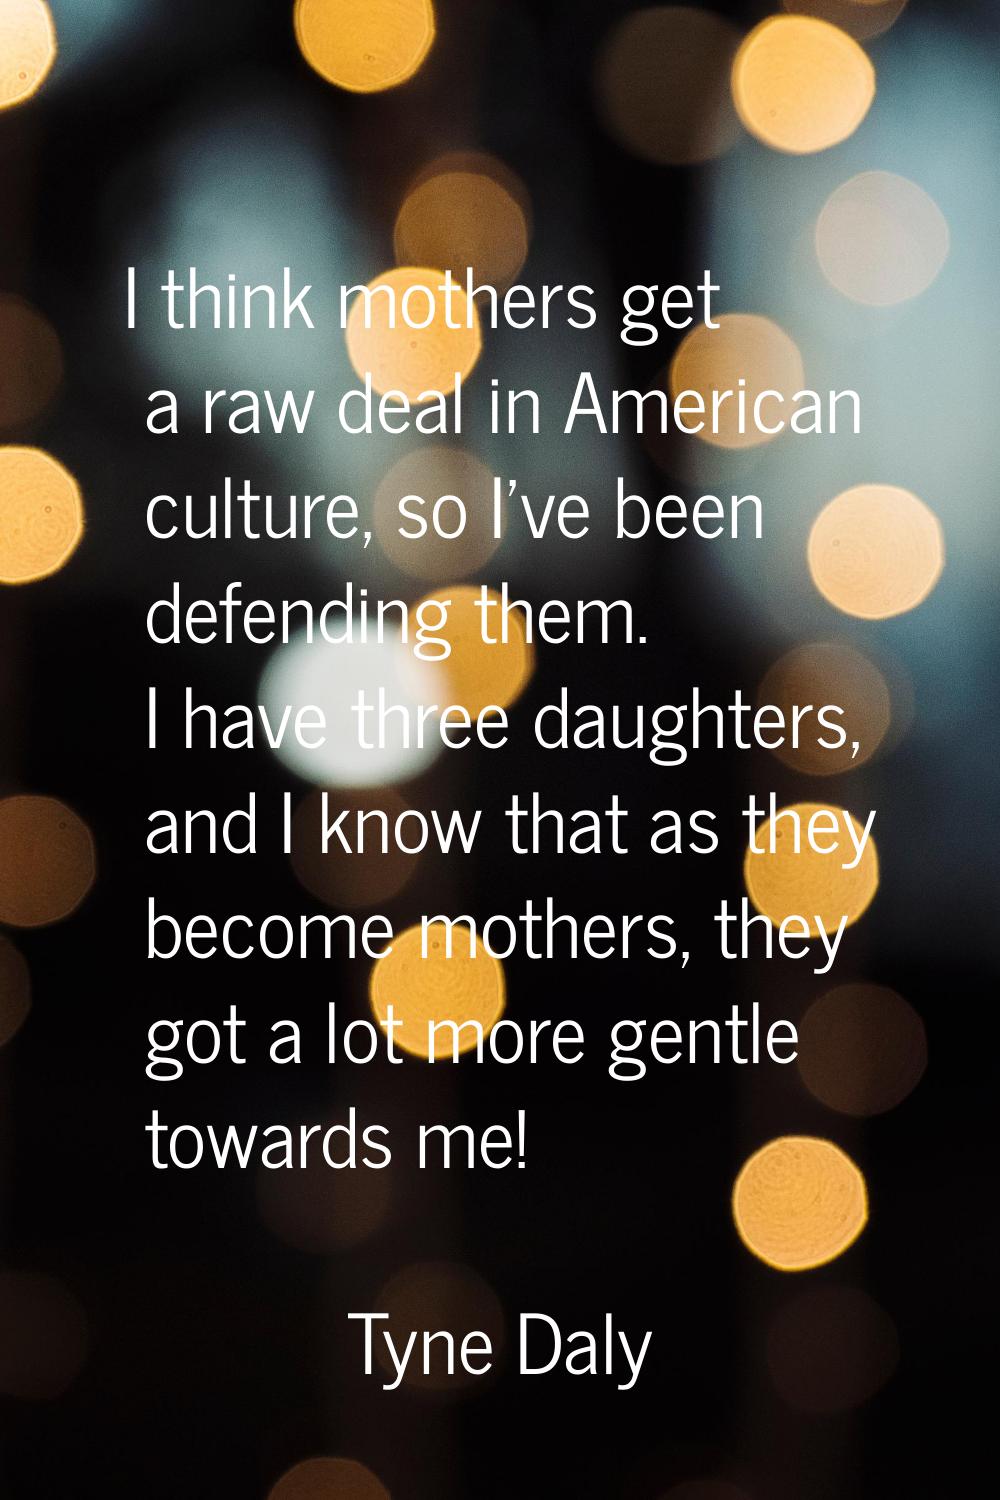 I think mothers get a raw deal in American culture, so I've been defending them. I have three daugh